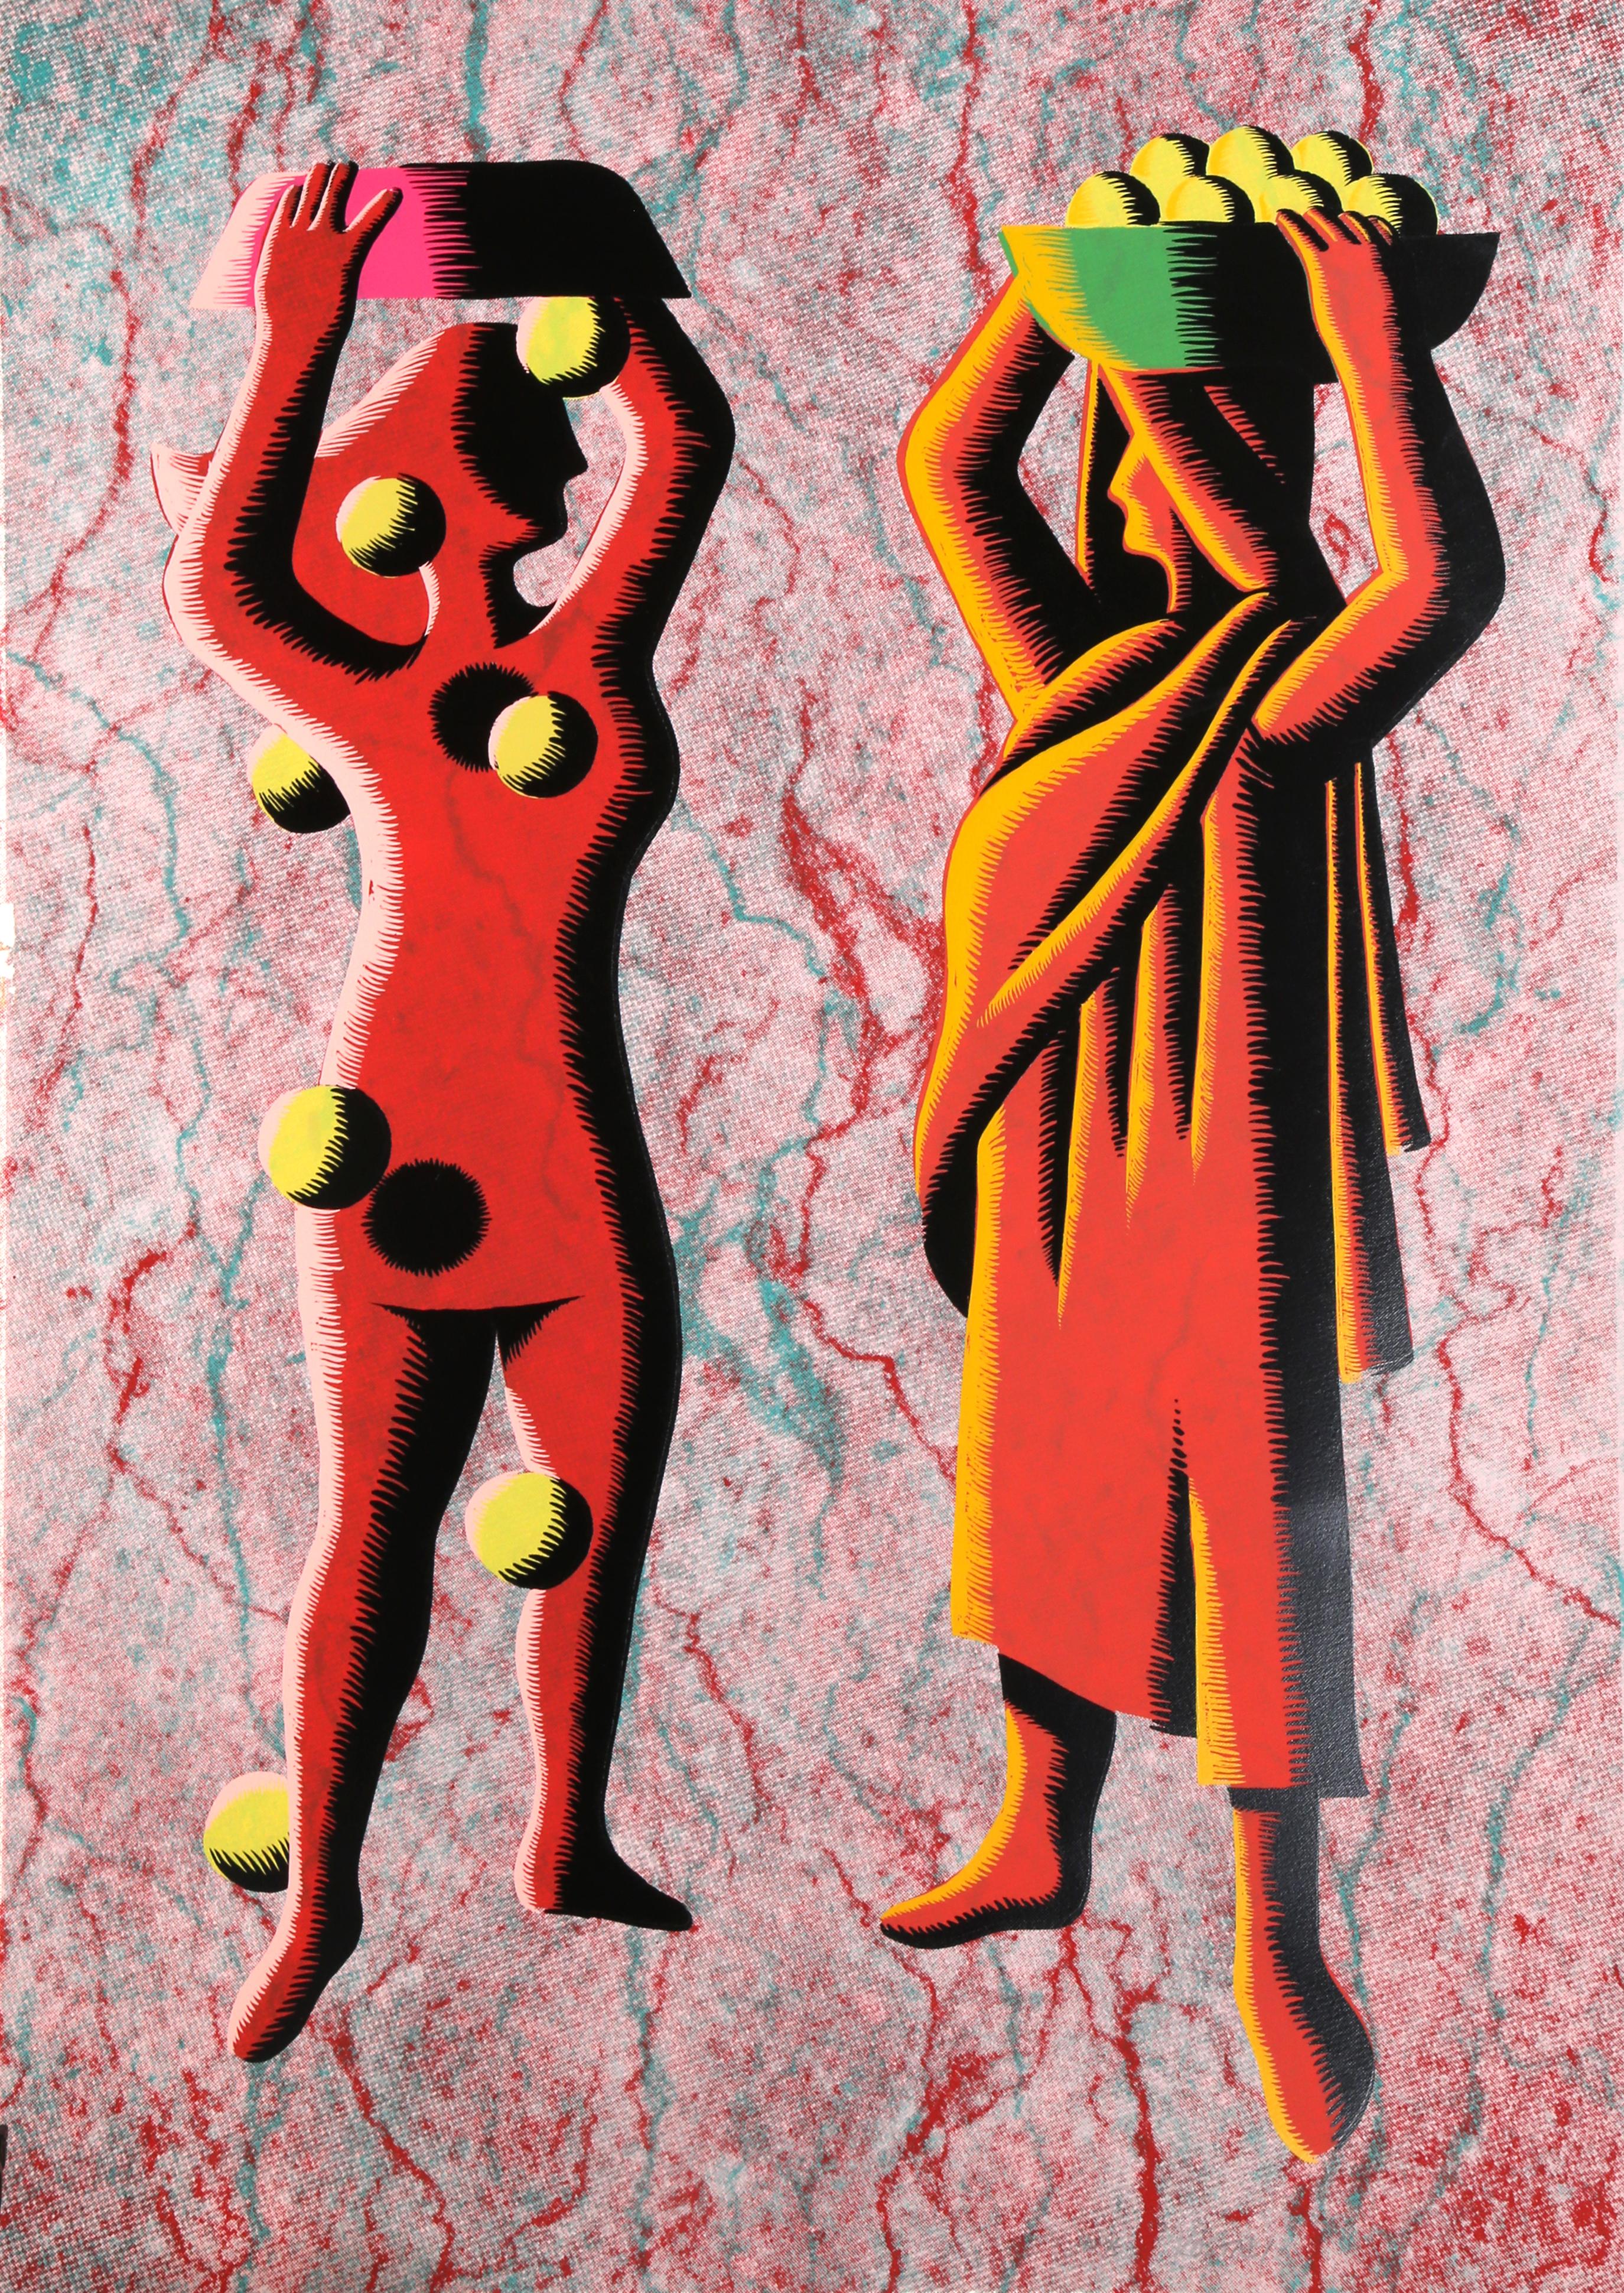 Two Cultures, Red, by Mark Kostabi